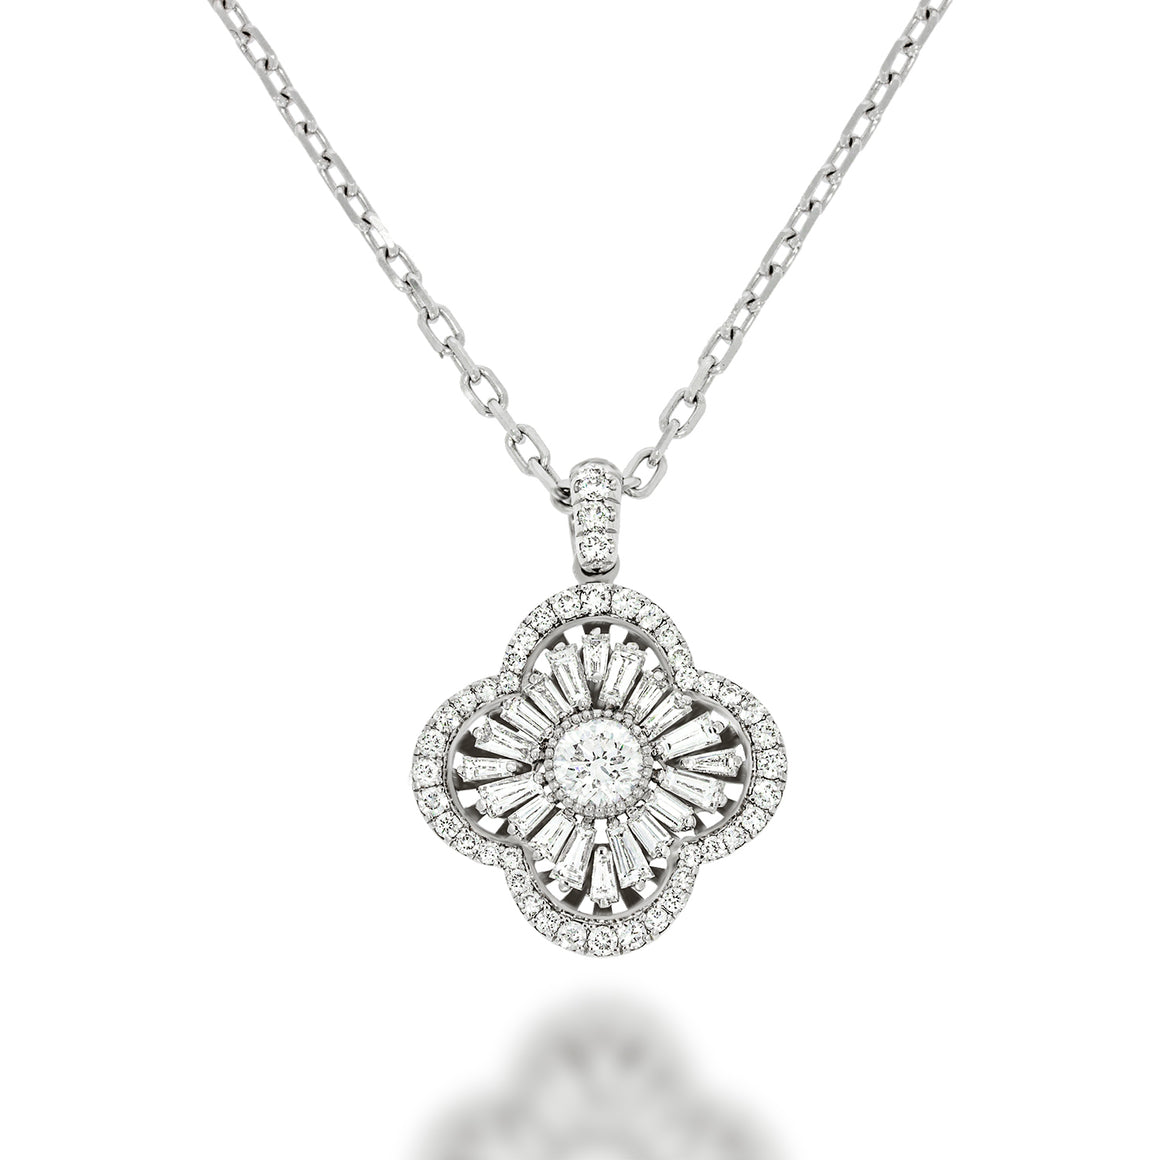 luxurious pendant Victorian Style. Clover shape pendant with a central big diamond and 64  luxurious and special diamonds. prefect  gift.